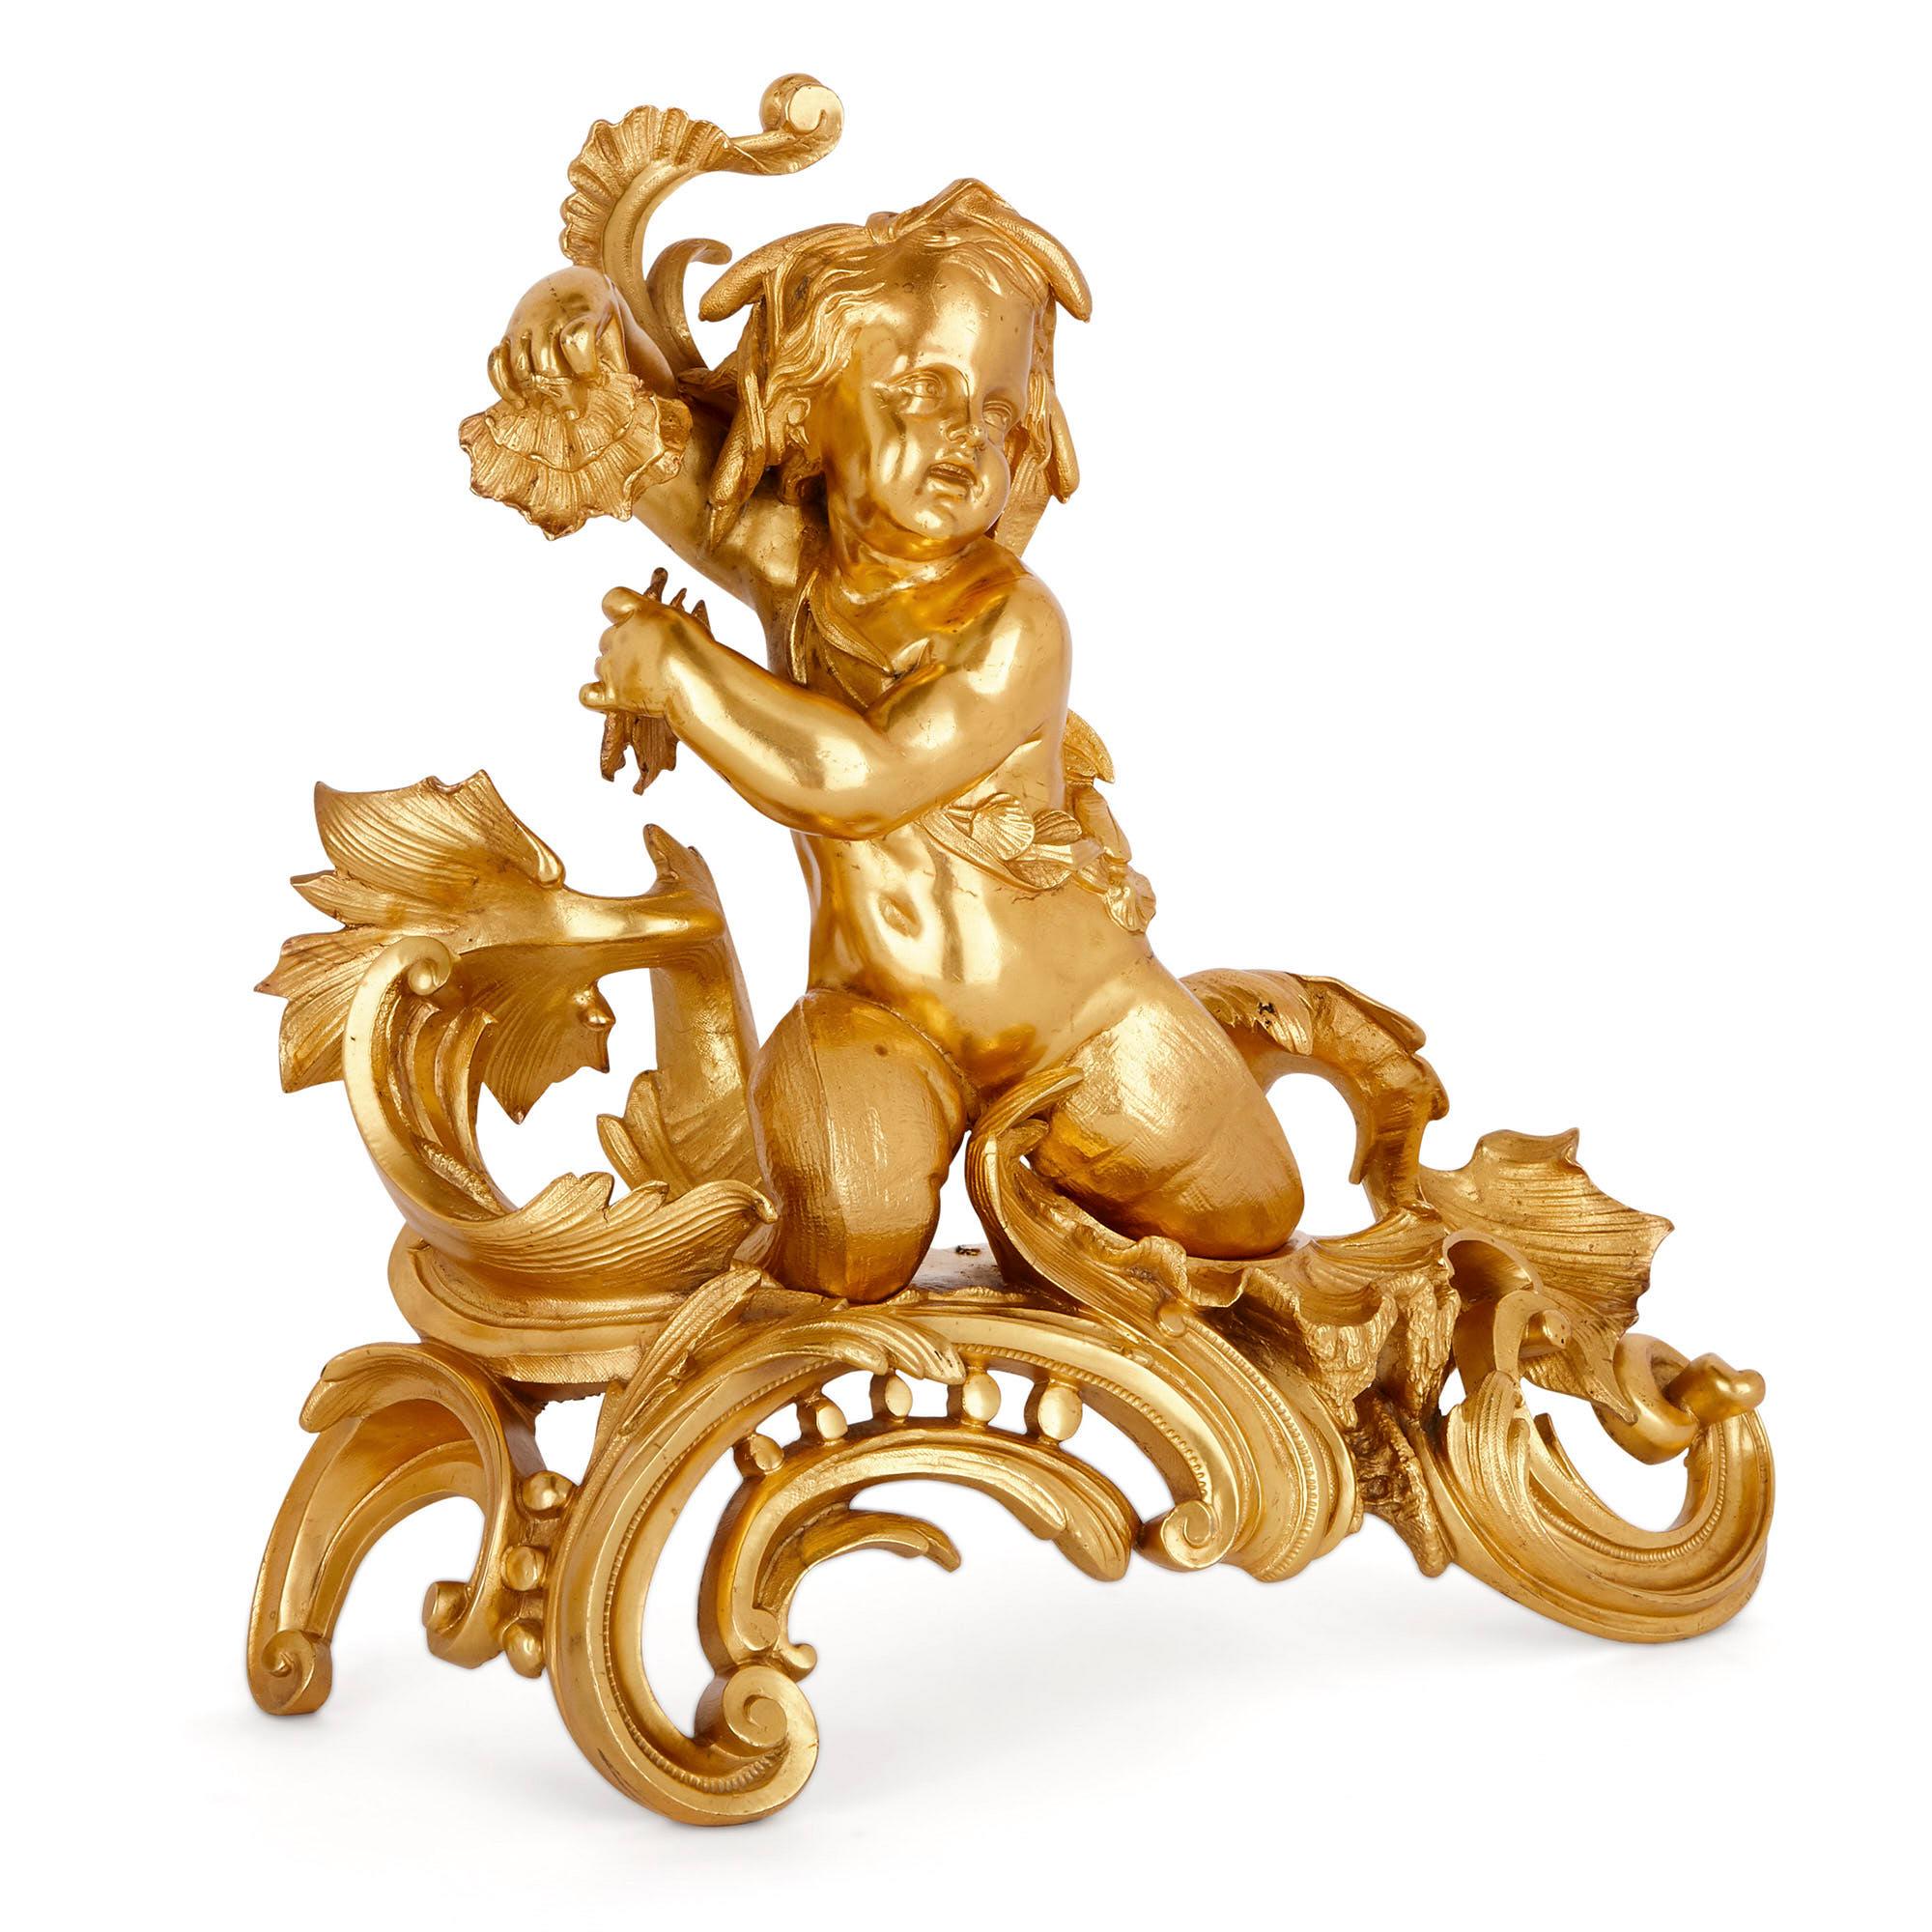 With their graceful interlaced curves and counter-curves, their asymmetry and use of sea-themed motifs, these chenets (andirons or fire-dogs) are clearly Rococo in their style. The Rococo style first became fashionable in the early 18th Century in